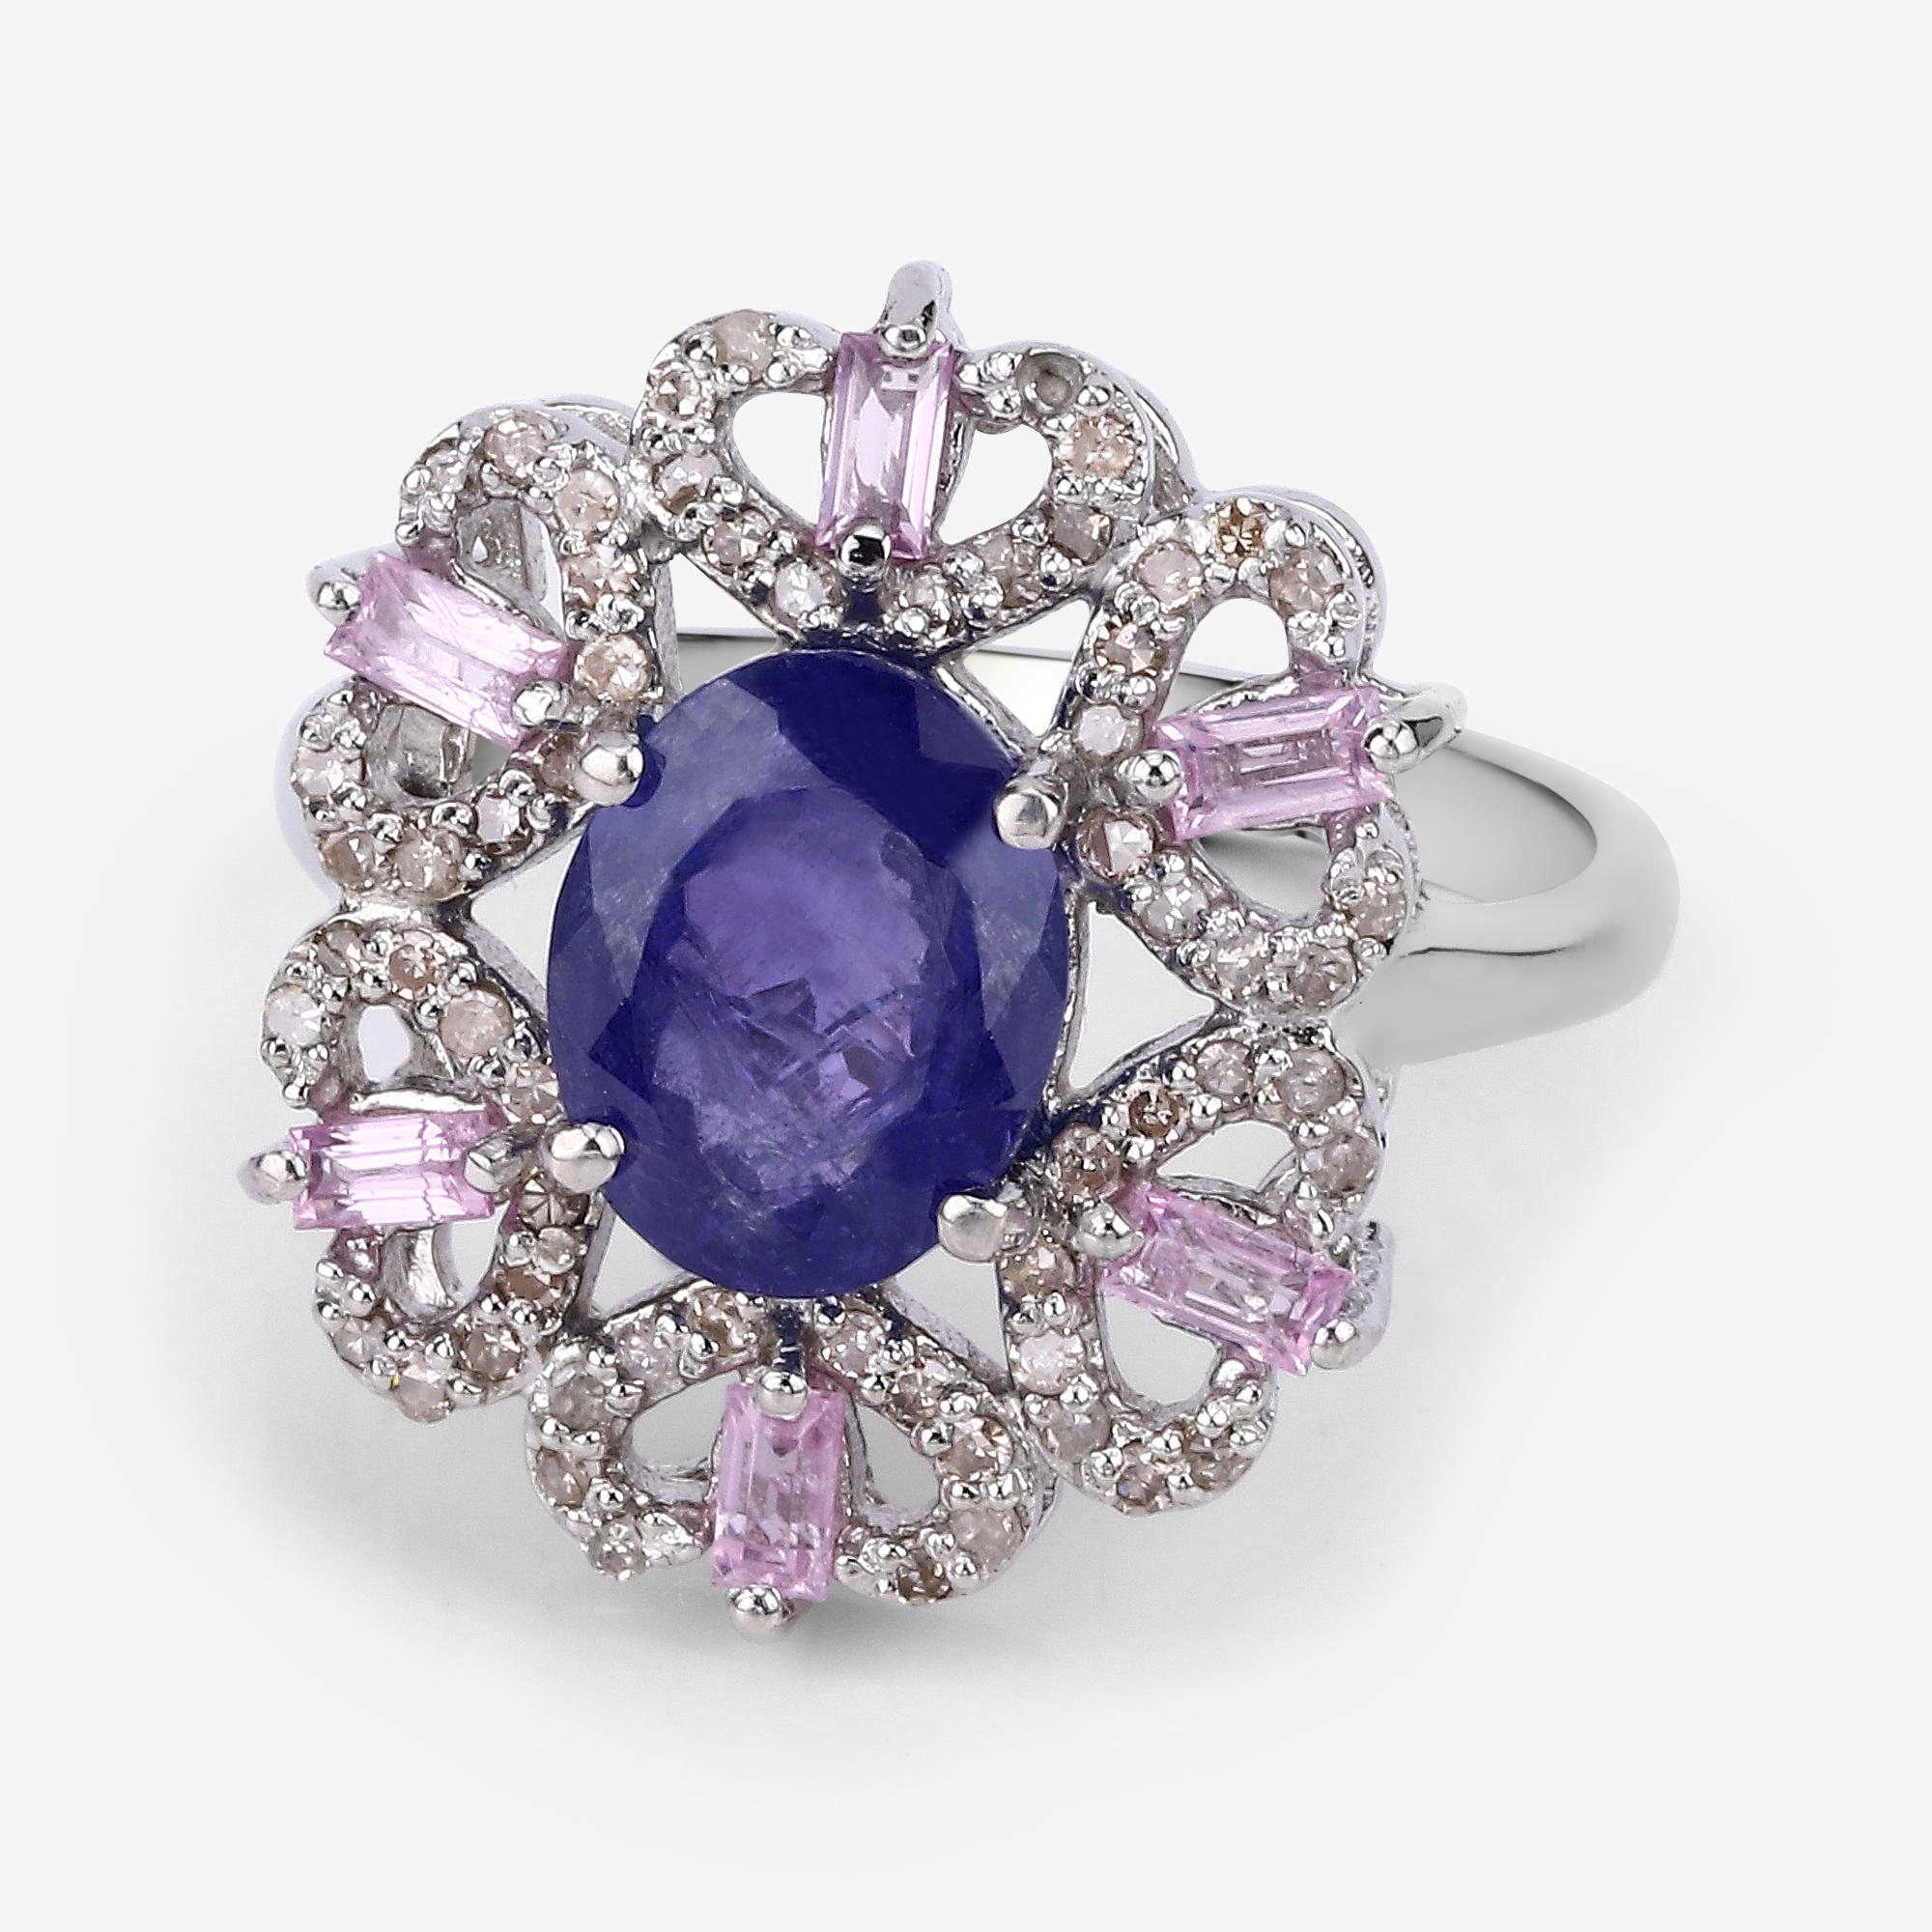 Oval Cut 3.01cttw Tanzanite, Pink Sapphires with Diamonds 0.41cttw Sterling Silver Ring